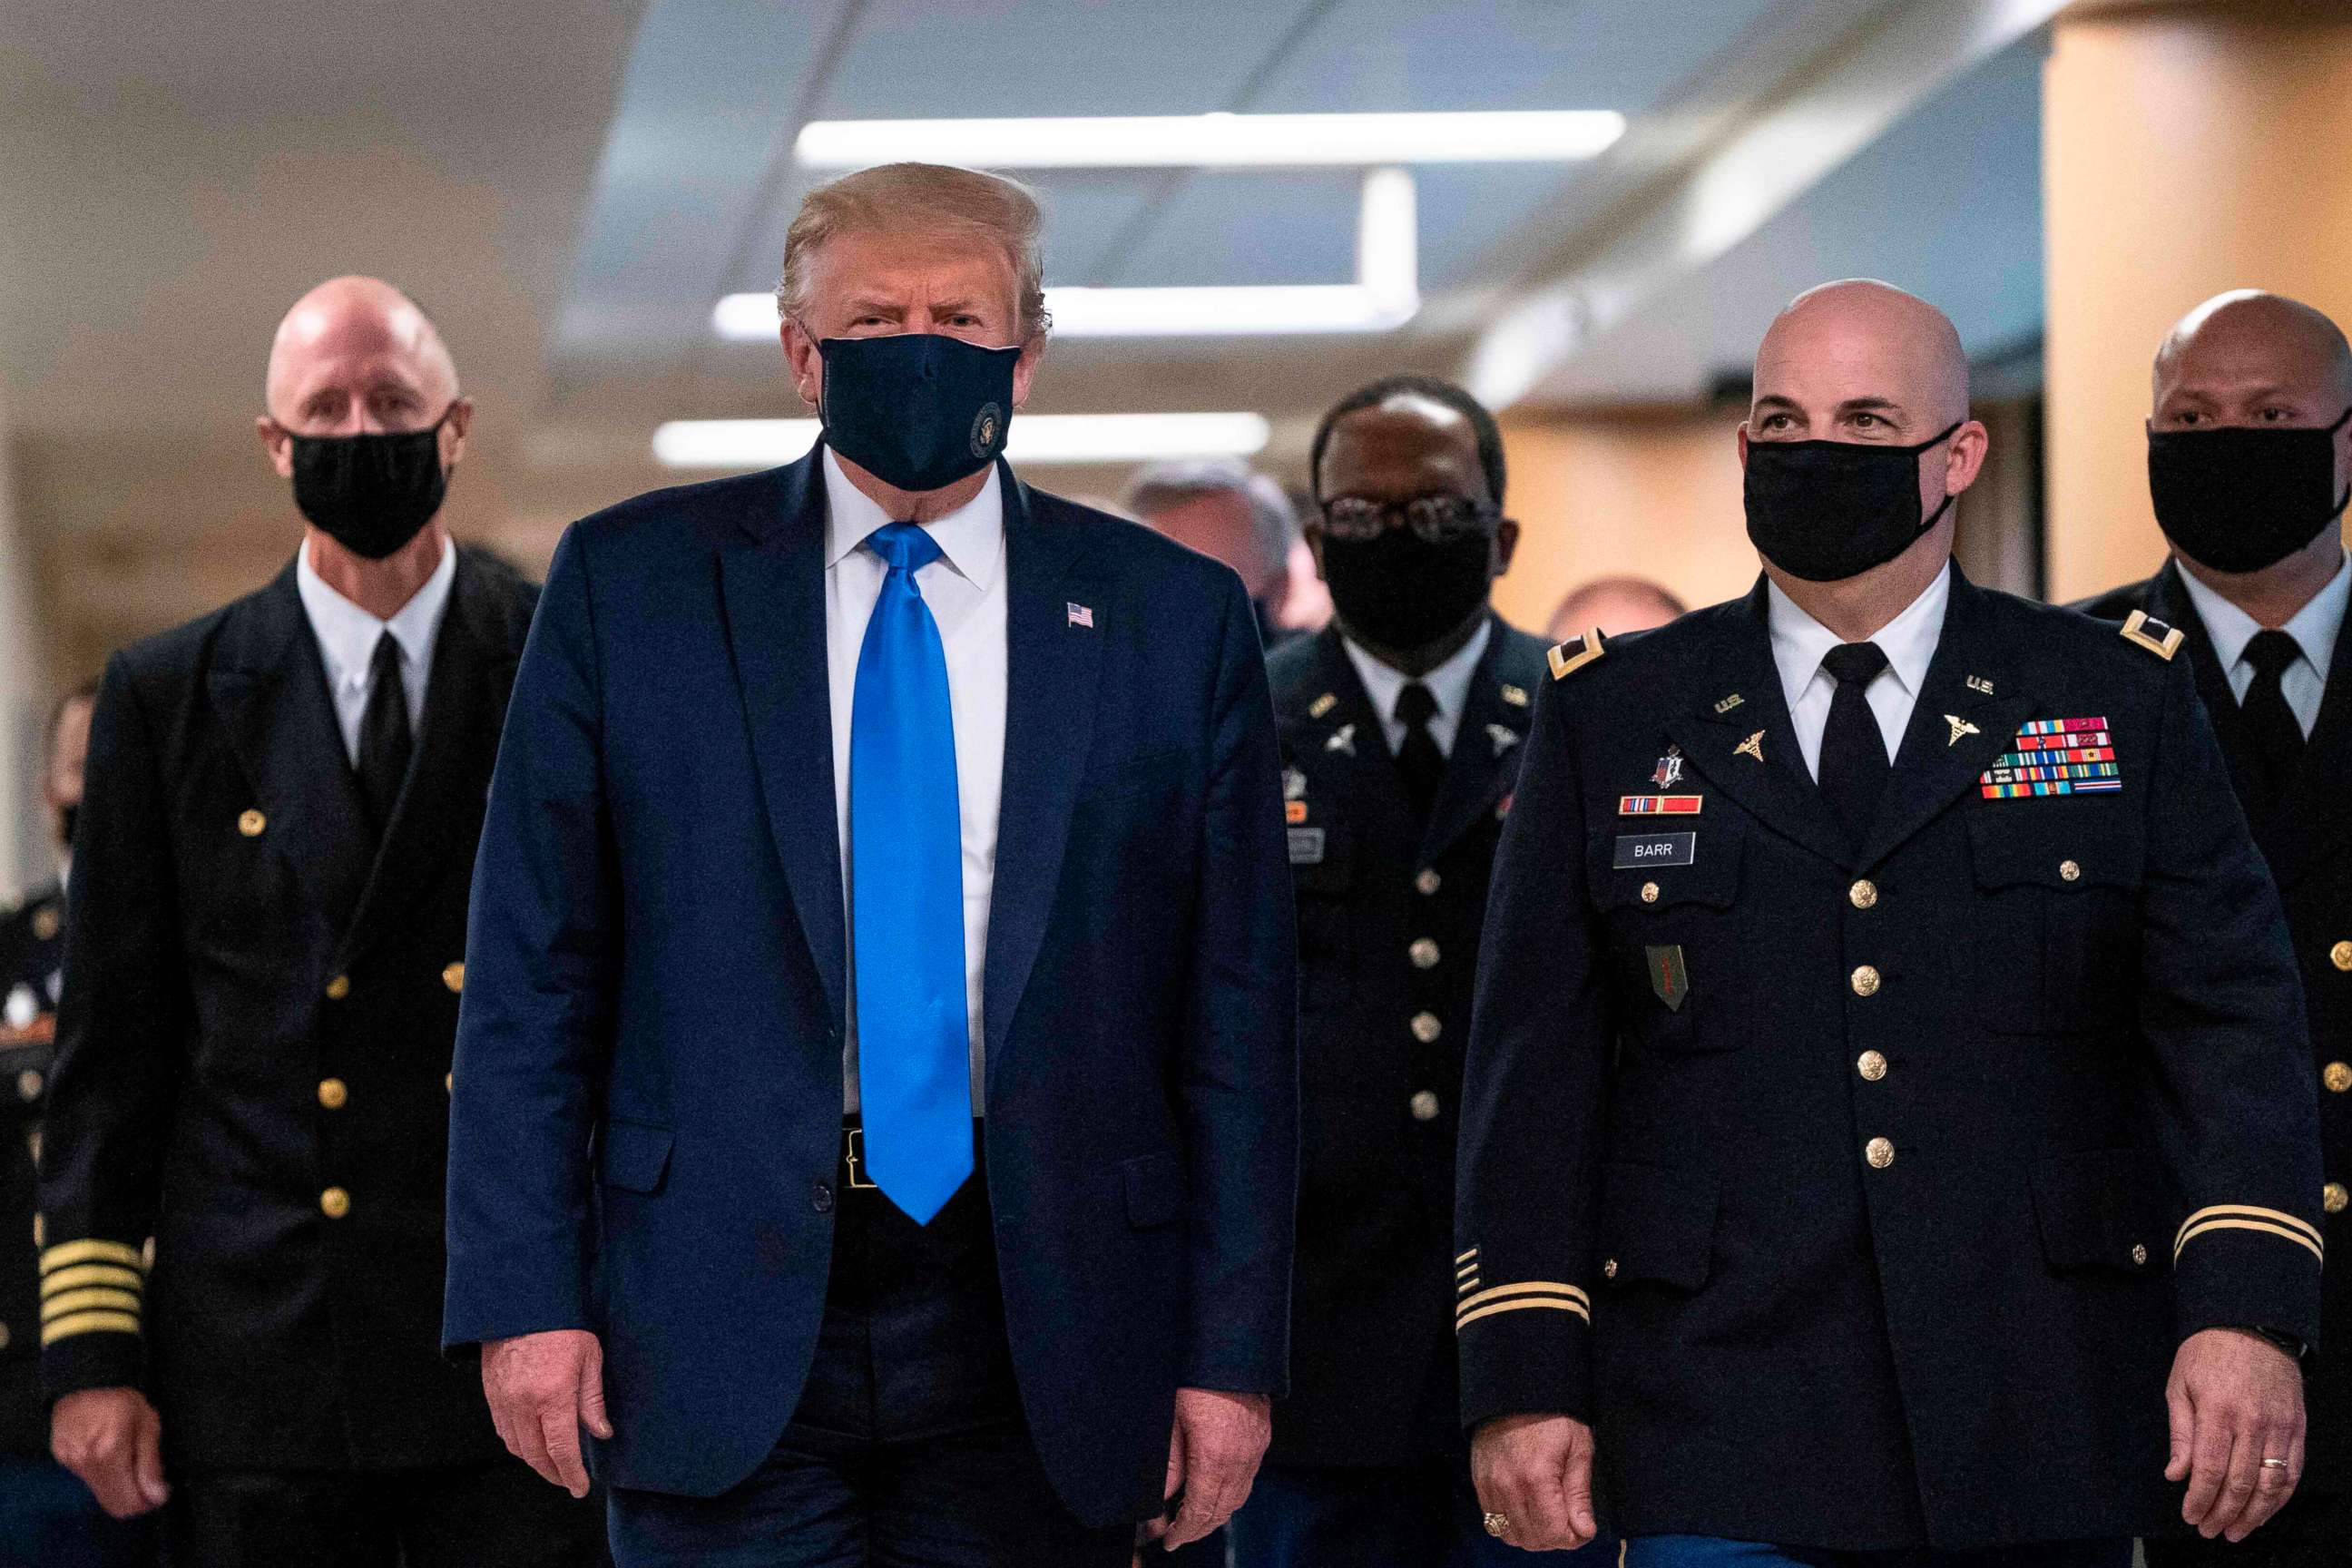 PHOTO: President Donald Trump wears a mask as he visits Walter Reed National Military Medical Center in Bethesda, MD., on July 11, 2020.